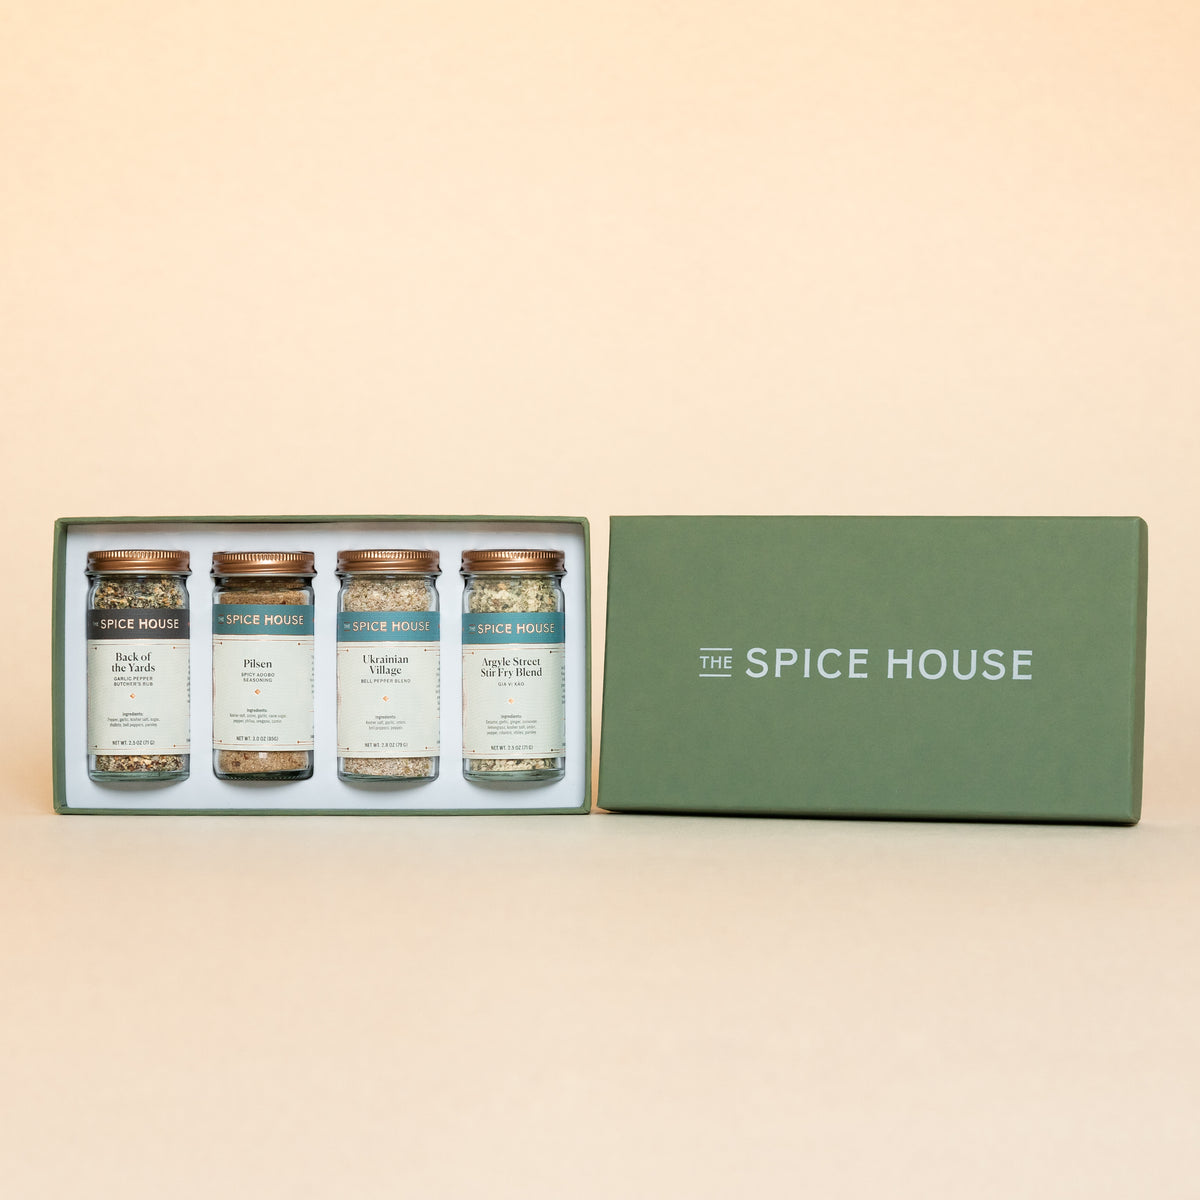 Best of Spice House 24-Jar Gift Set - The Spice House